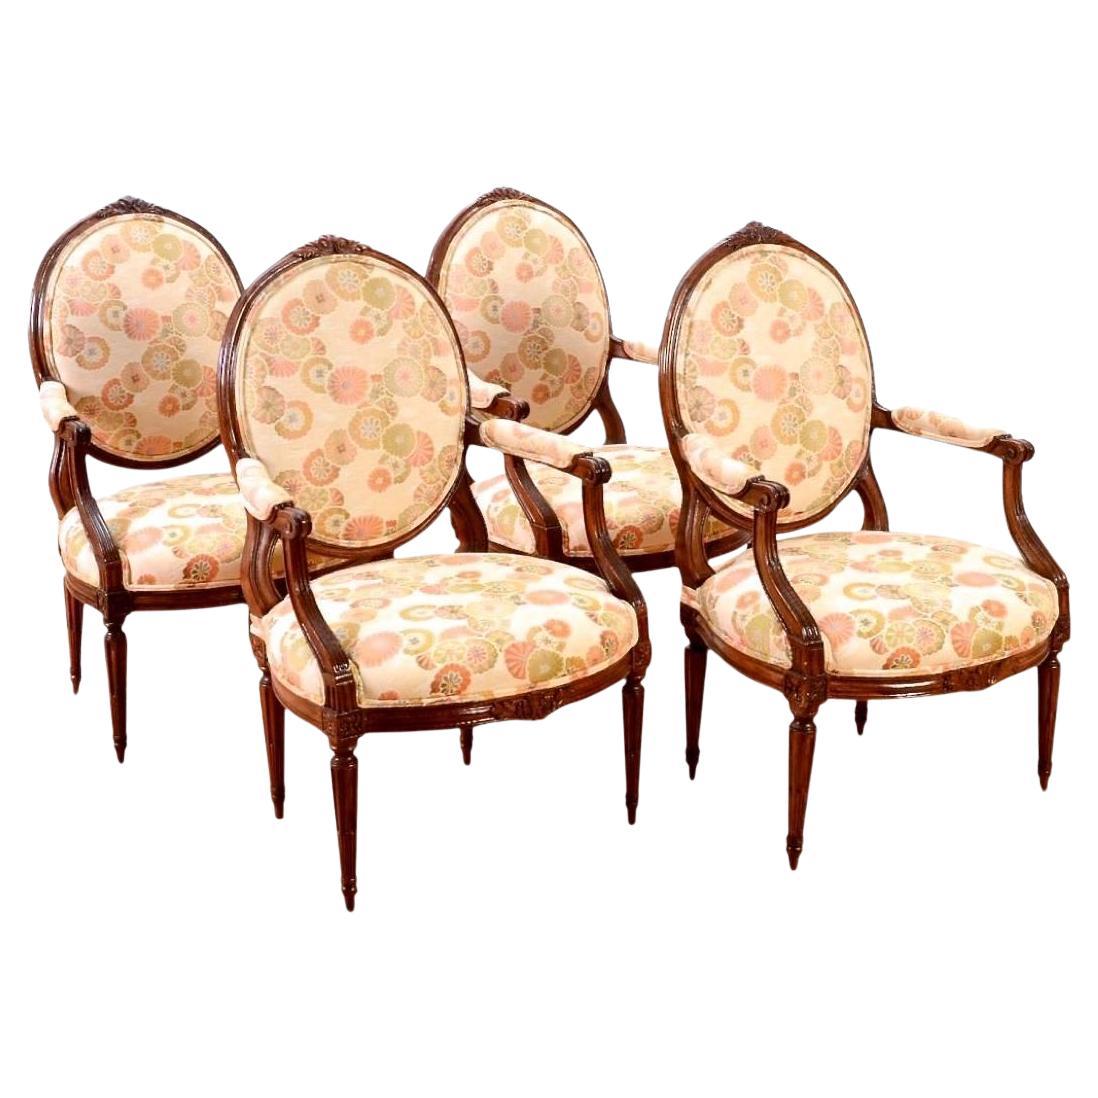 Set Of Four Louis XVI Style Carved Beechwood Fauteuils, 19th Century For Sale